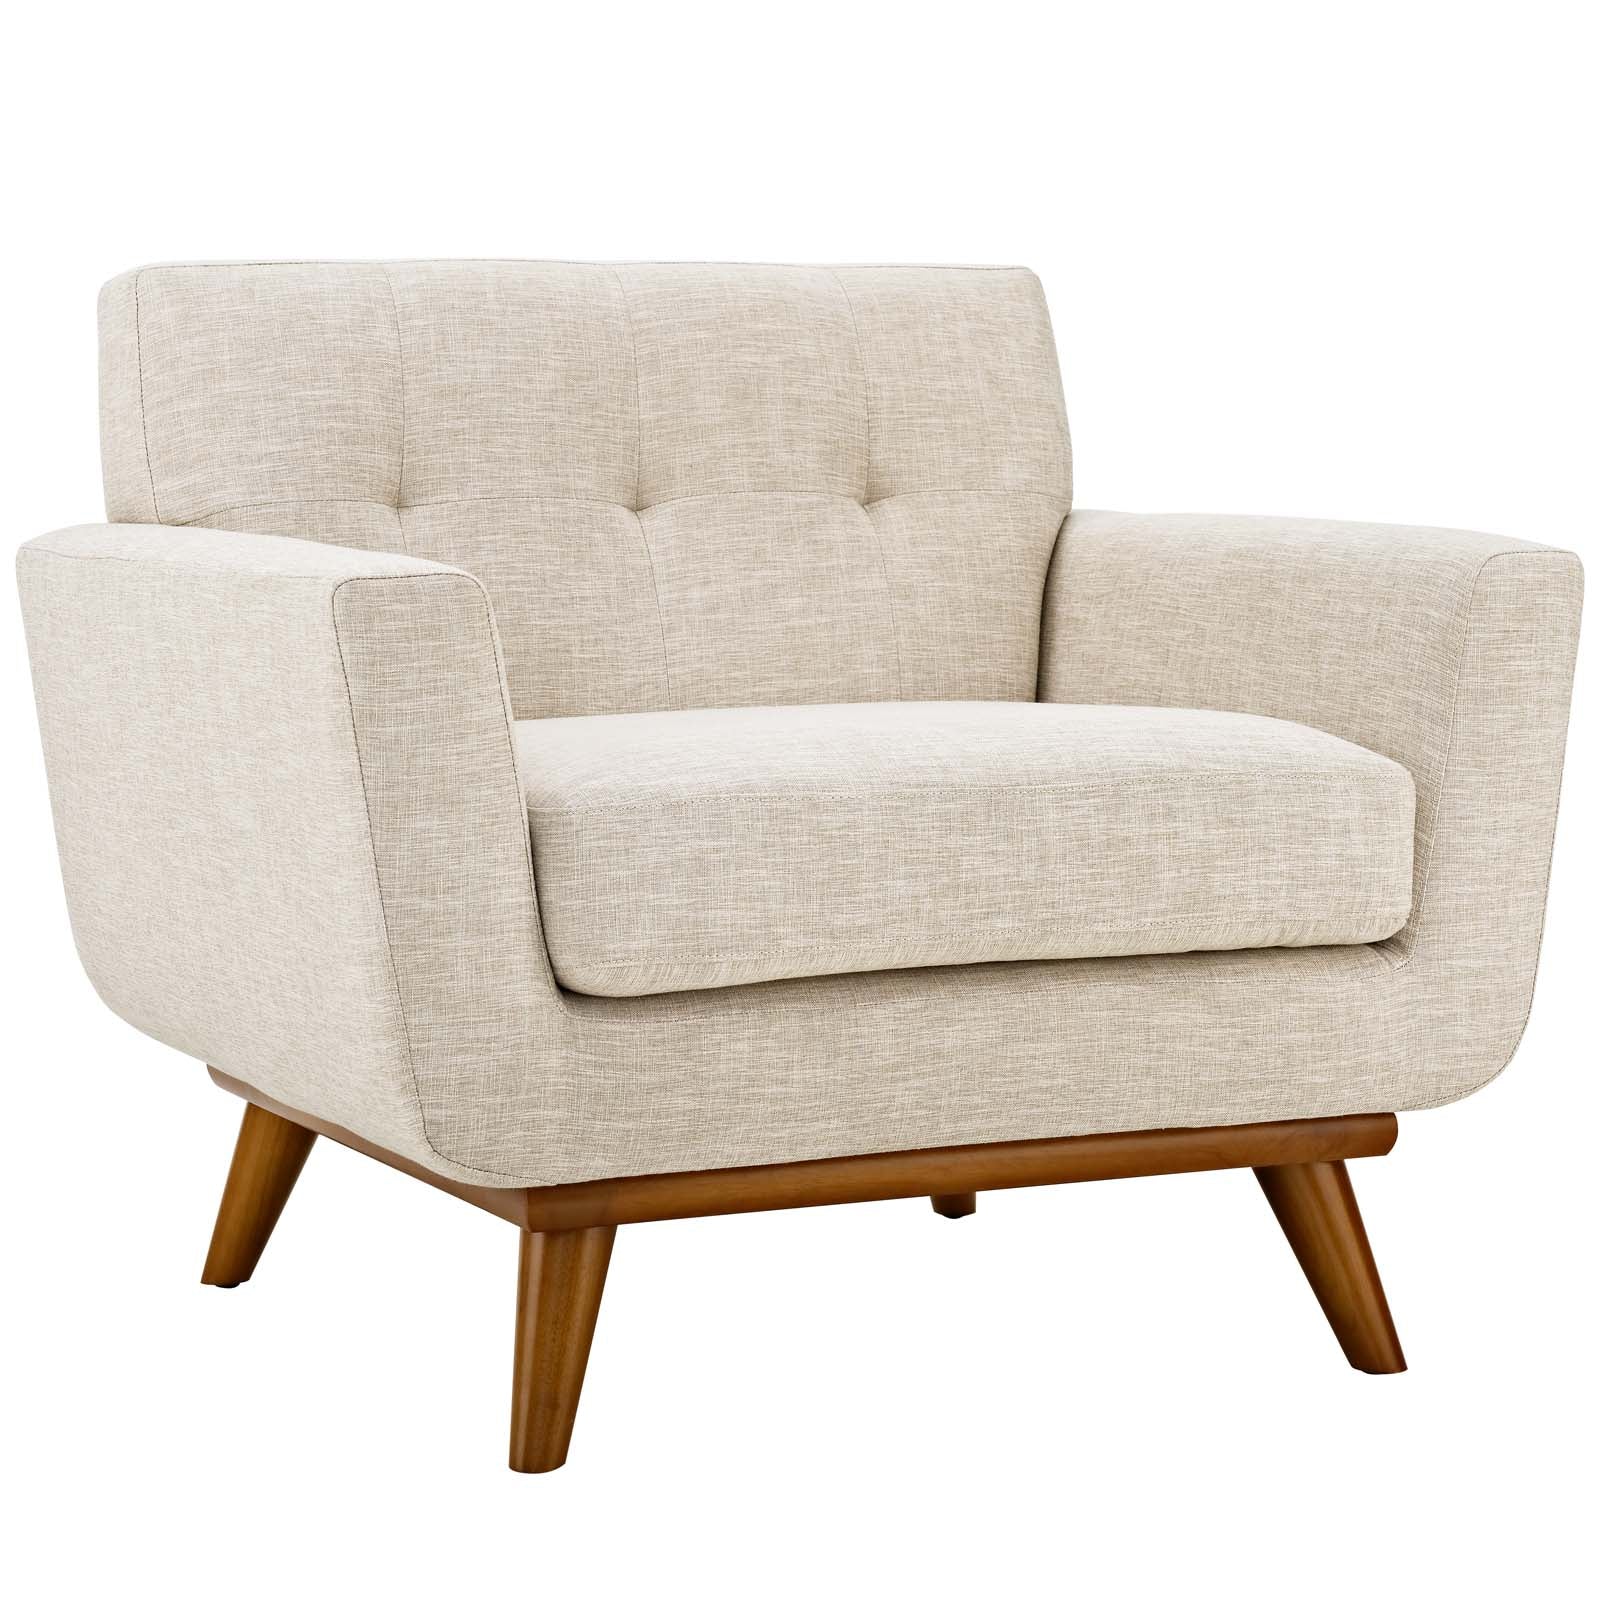 Modway Living Room Sets - Engage Armchairs and Sofa Beige ( Set of 3 )